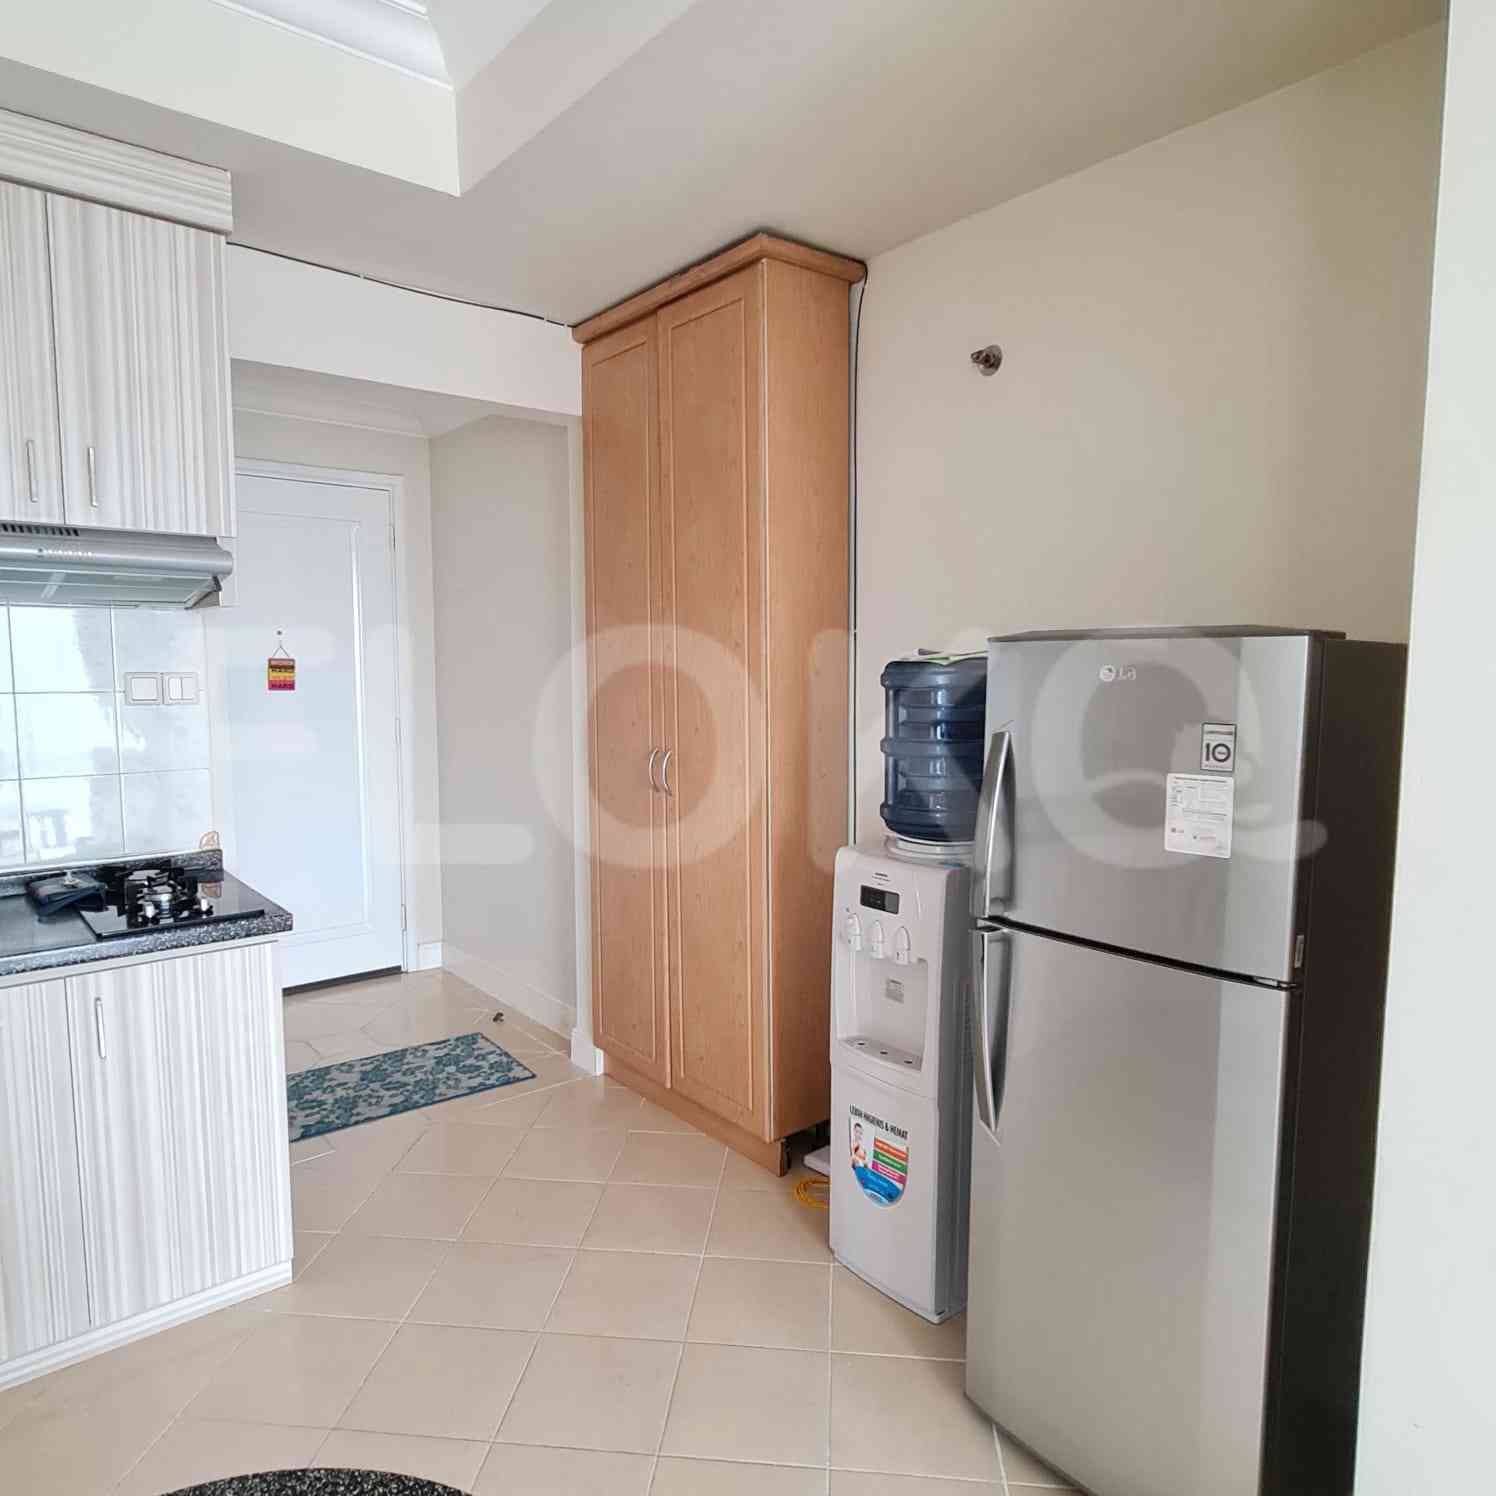 1 Bedroom on 13th Floor for Rent in Batavia Apartment - fbe796 13